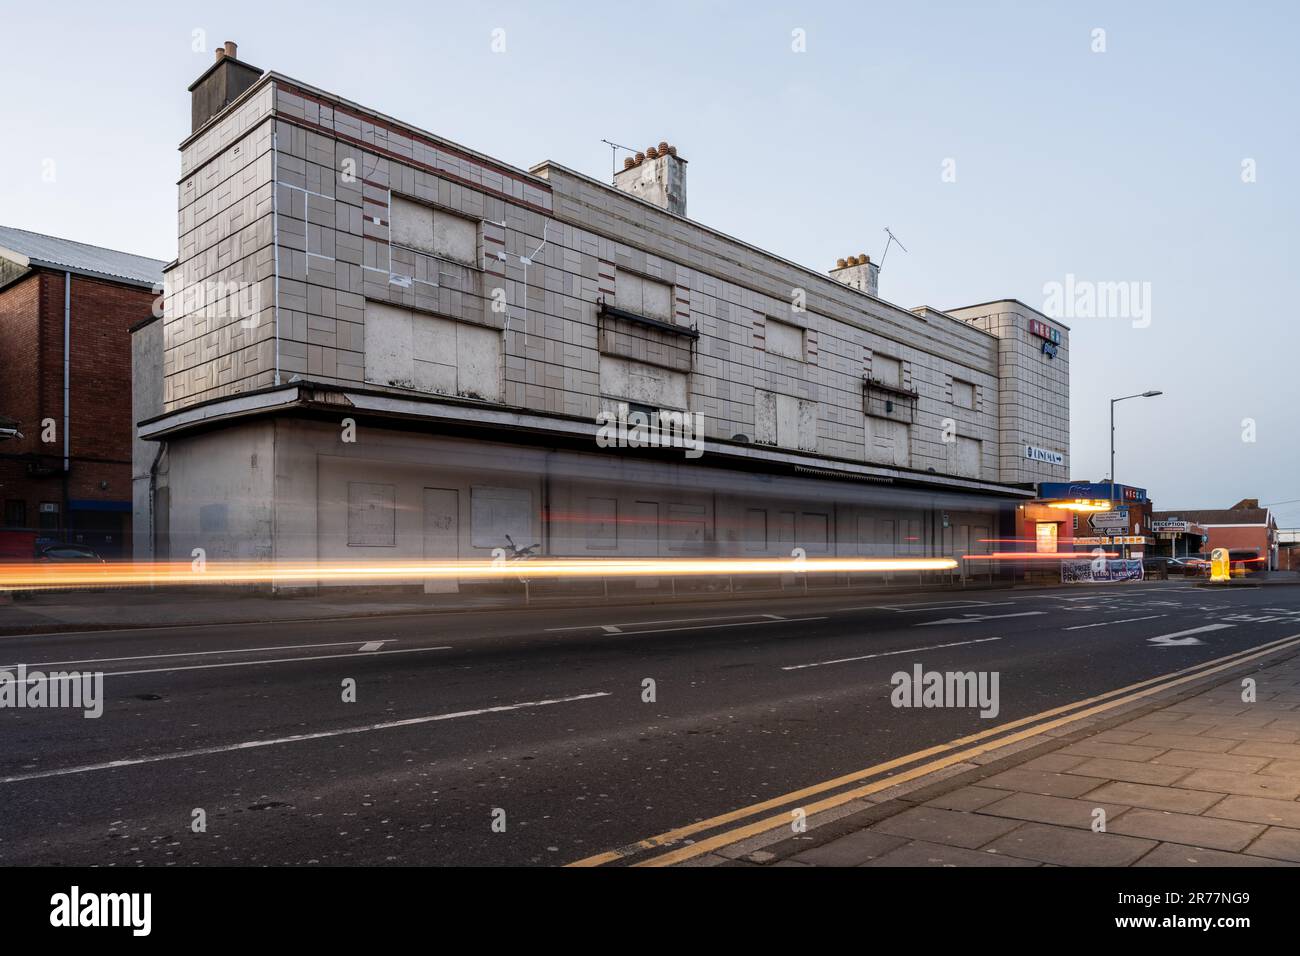 The disused Odeon Cinema building, designed by Thomas Cecil Howitt, stands boarded up and semi-derelict in Bridgwater, Somerset. Stock Photo